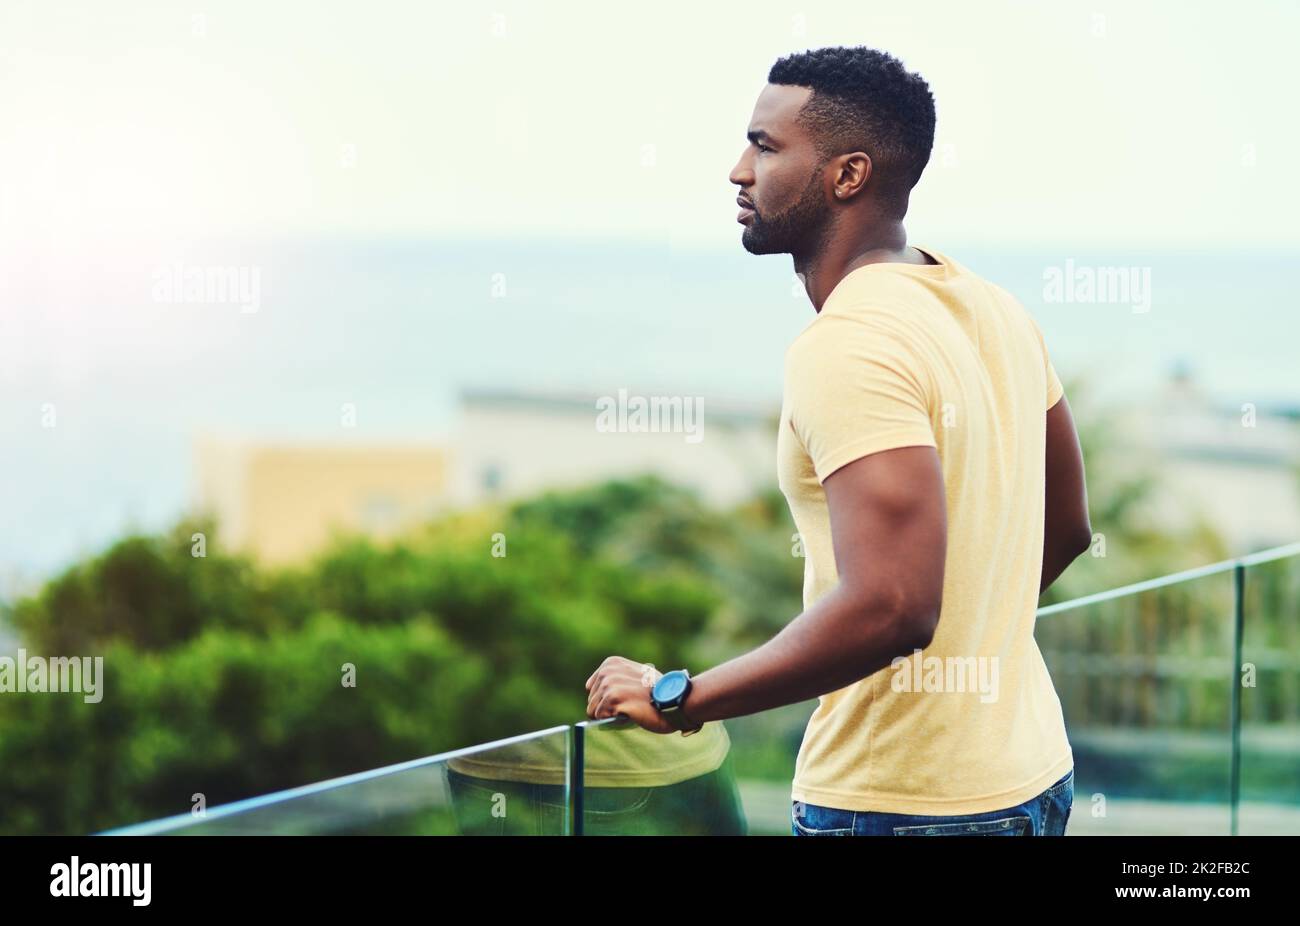 I would have never imagined Id be here one day. Shot of a handsome young man looking at the scenery while relaxing outdoors on holiday. Stock Photo